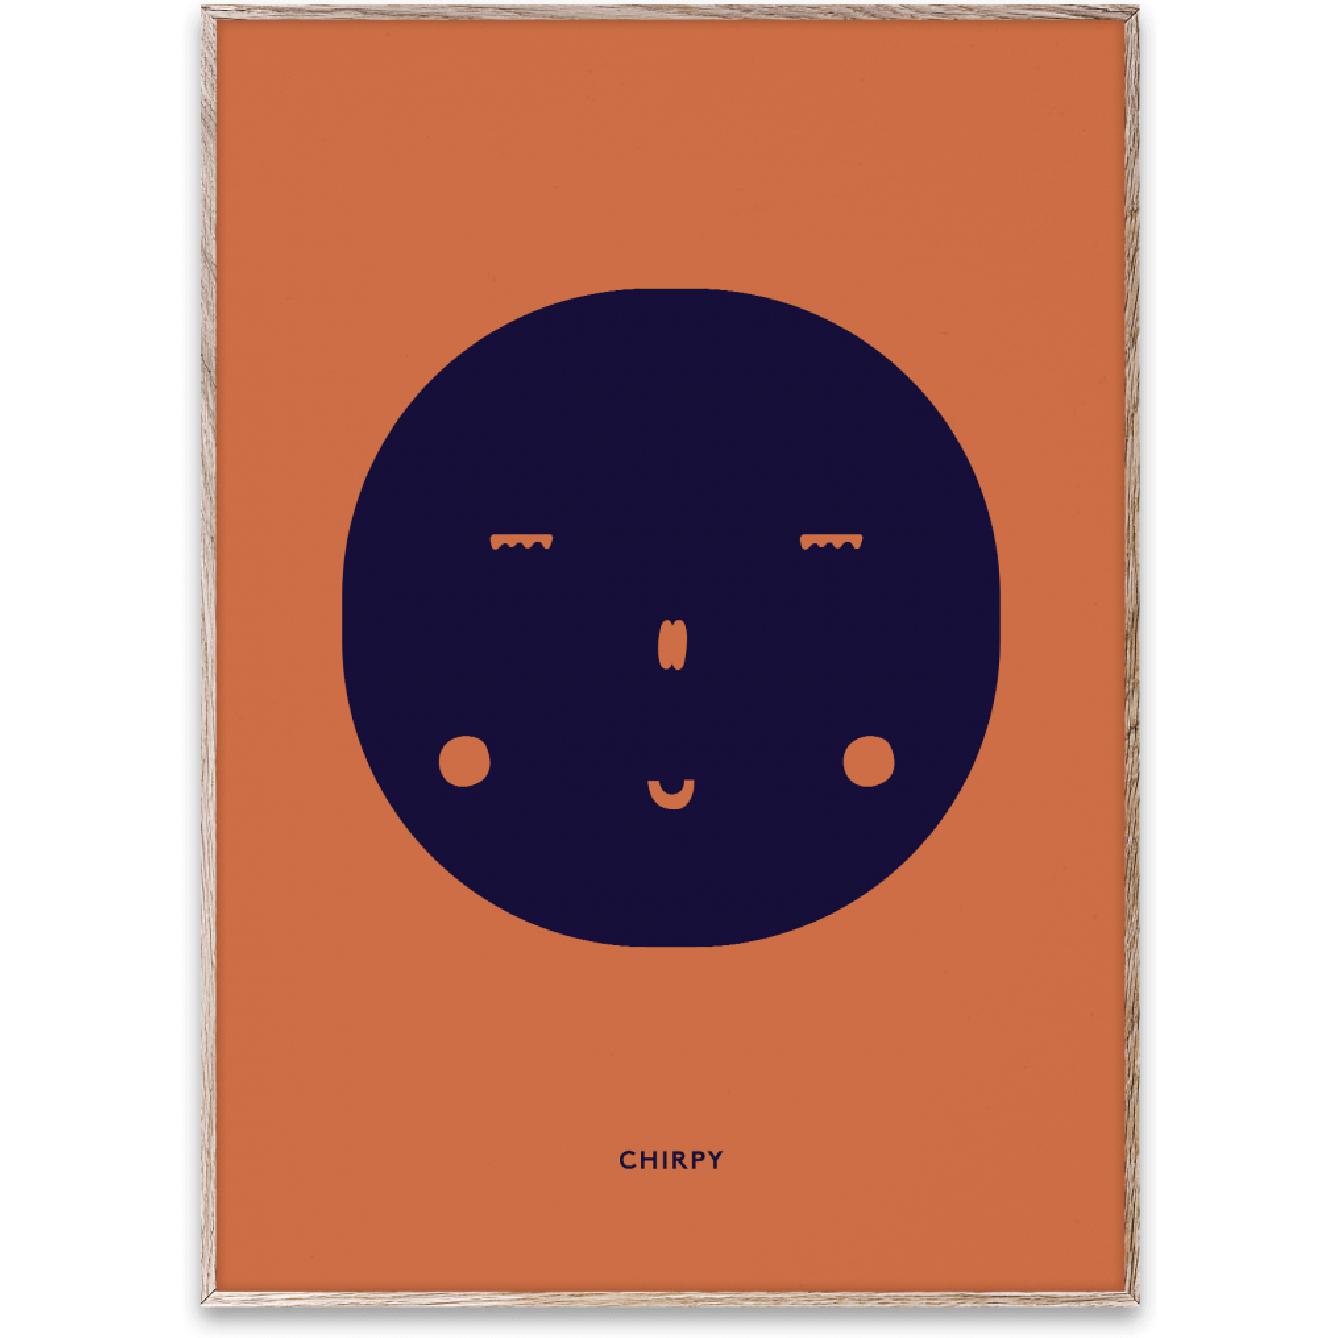 Paper Collective Circirpy Feeling Poster, 30x40 cm